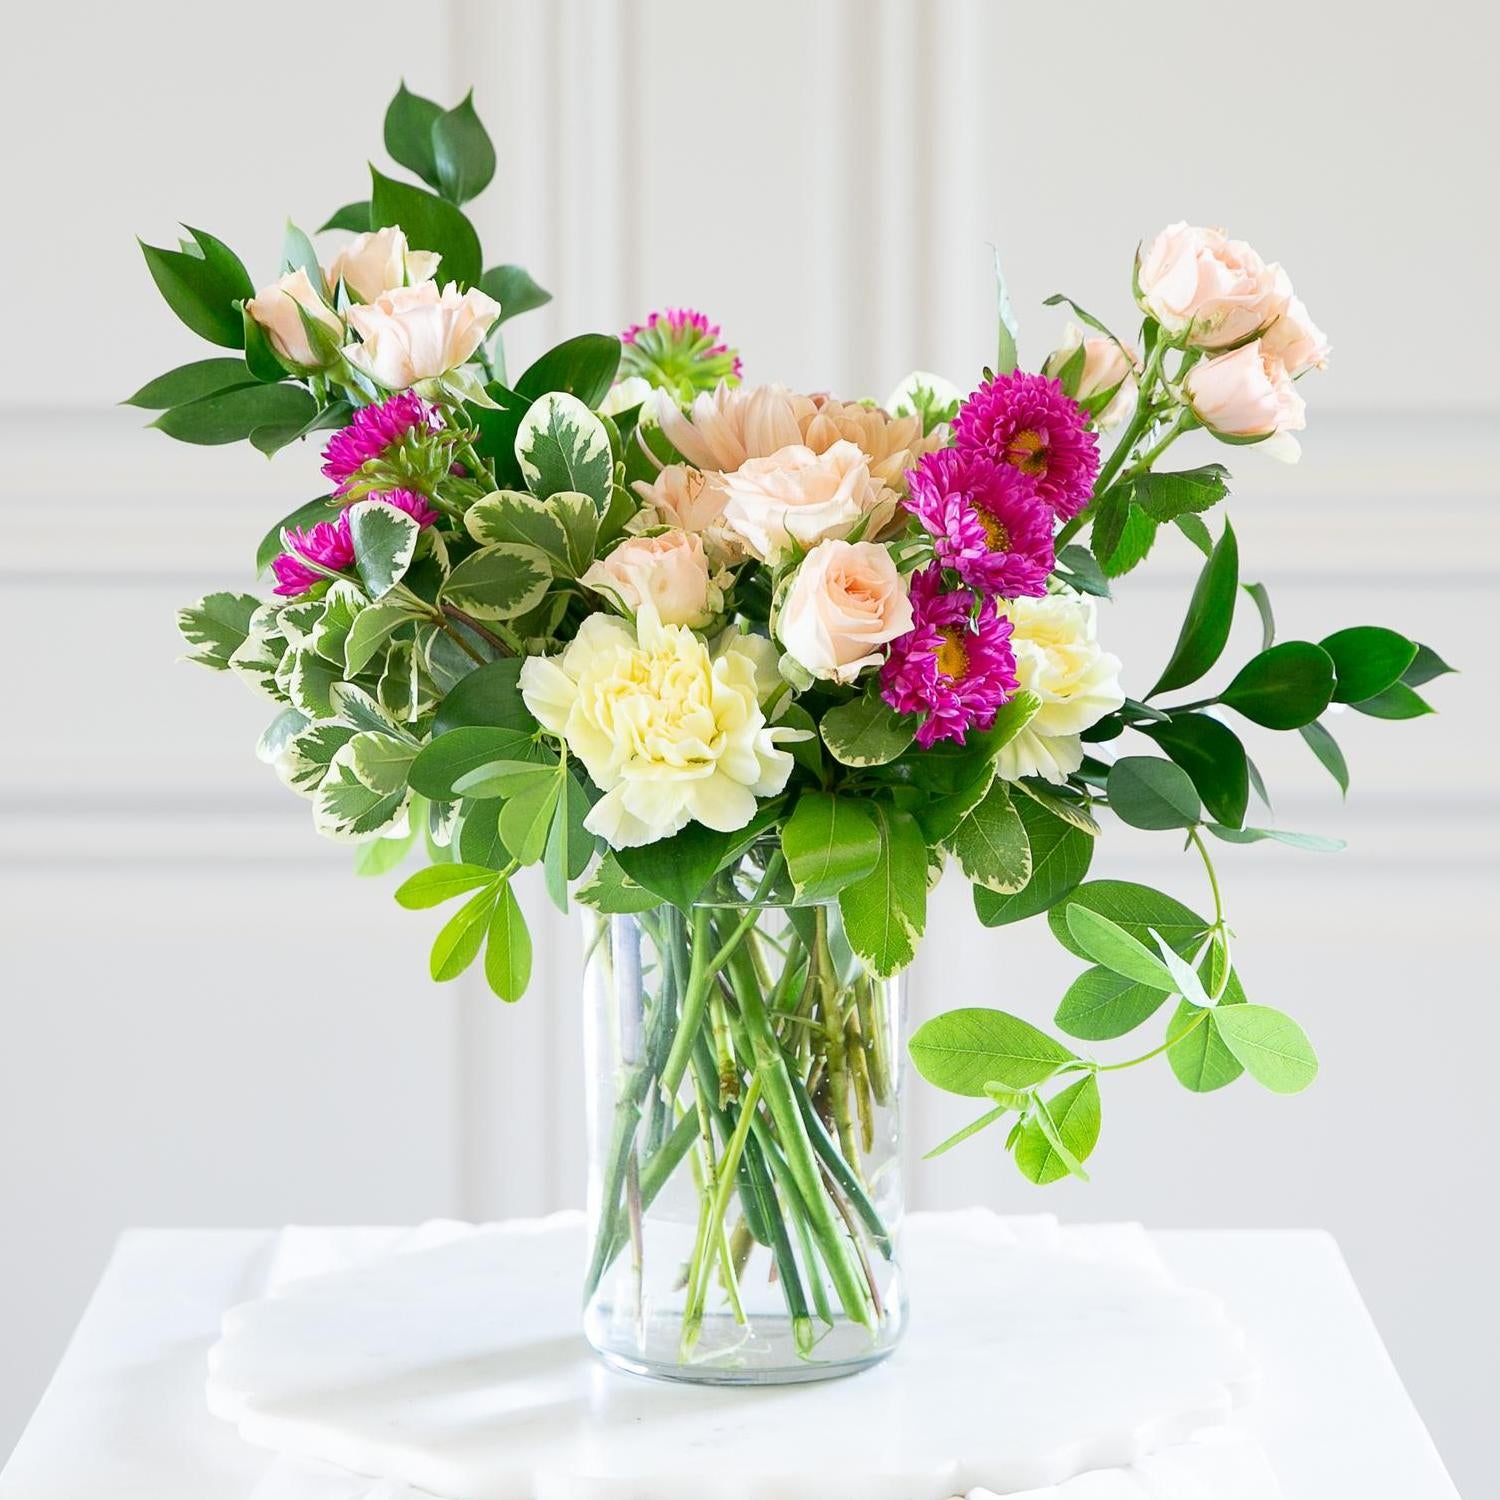 Glass cylinder vase with a vibrant selection of pink roses, purple asters, and lush greenery on a marble table.